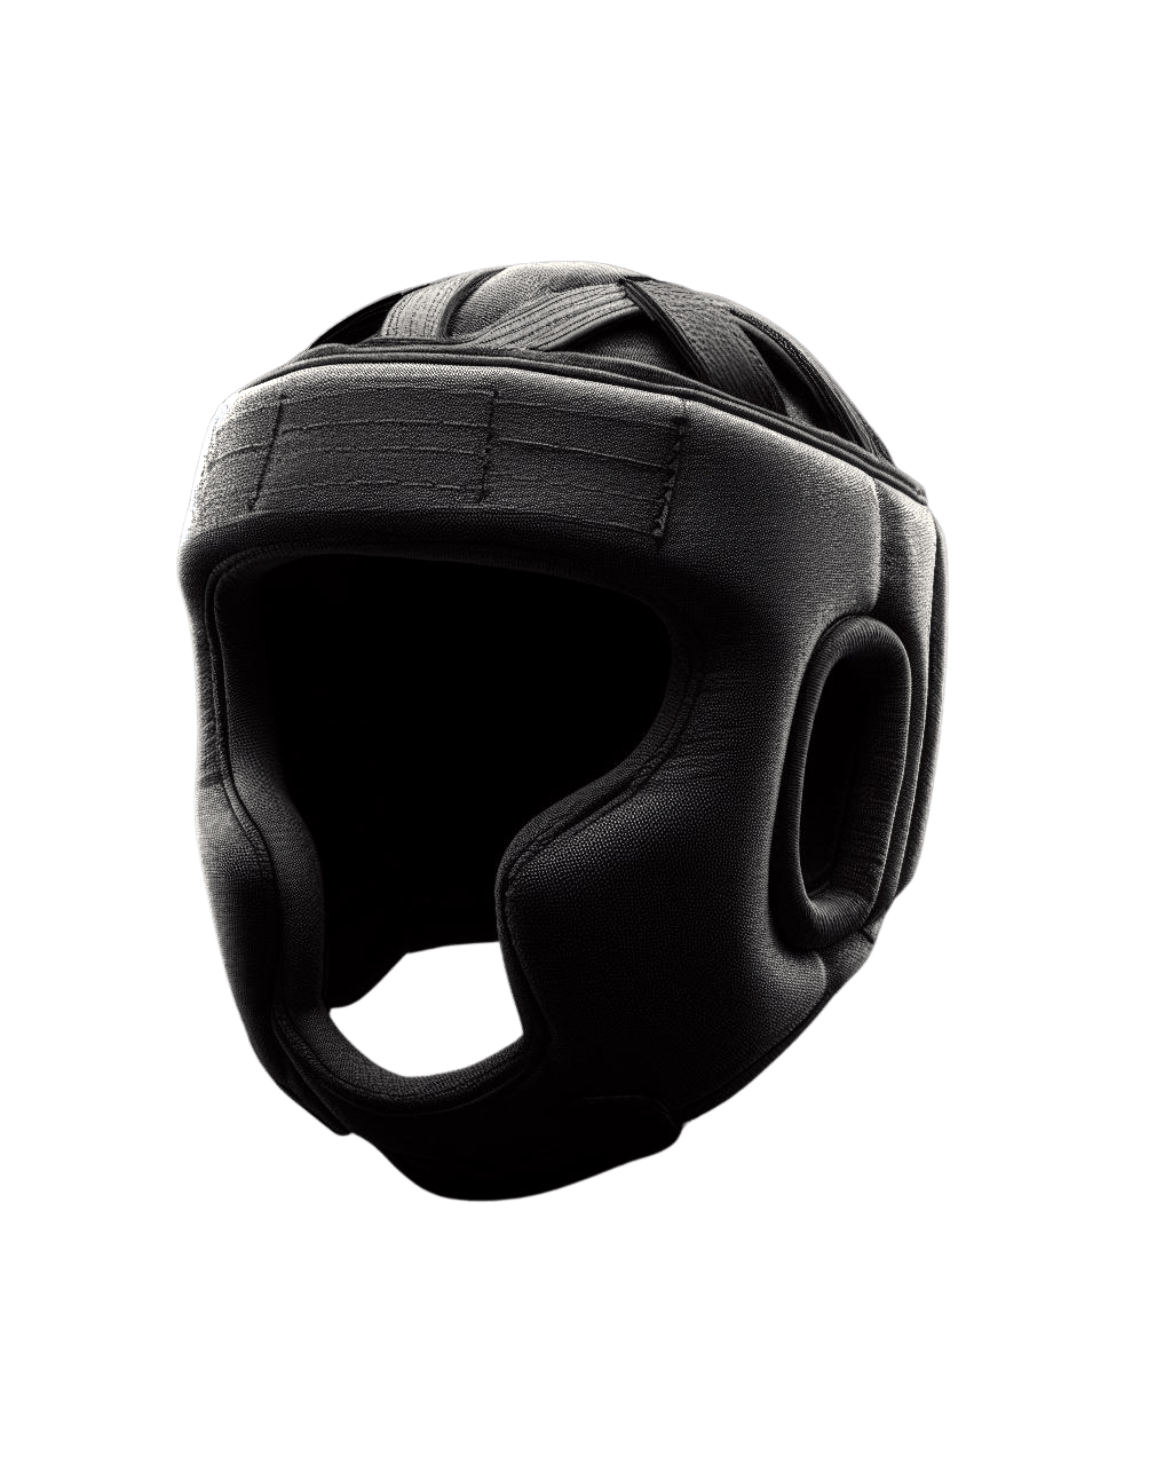 Redko Sports Products - Protective Gear - Head Helmet